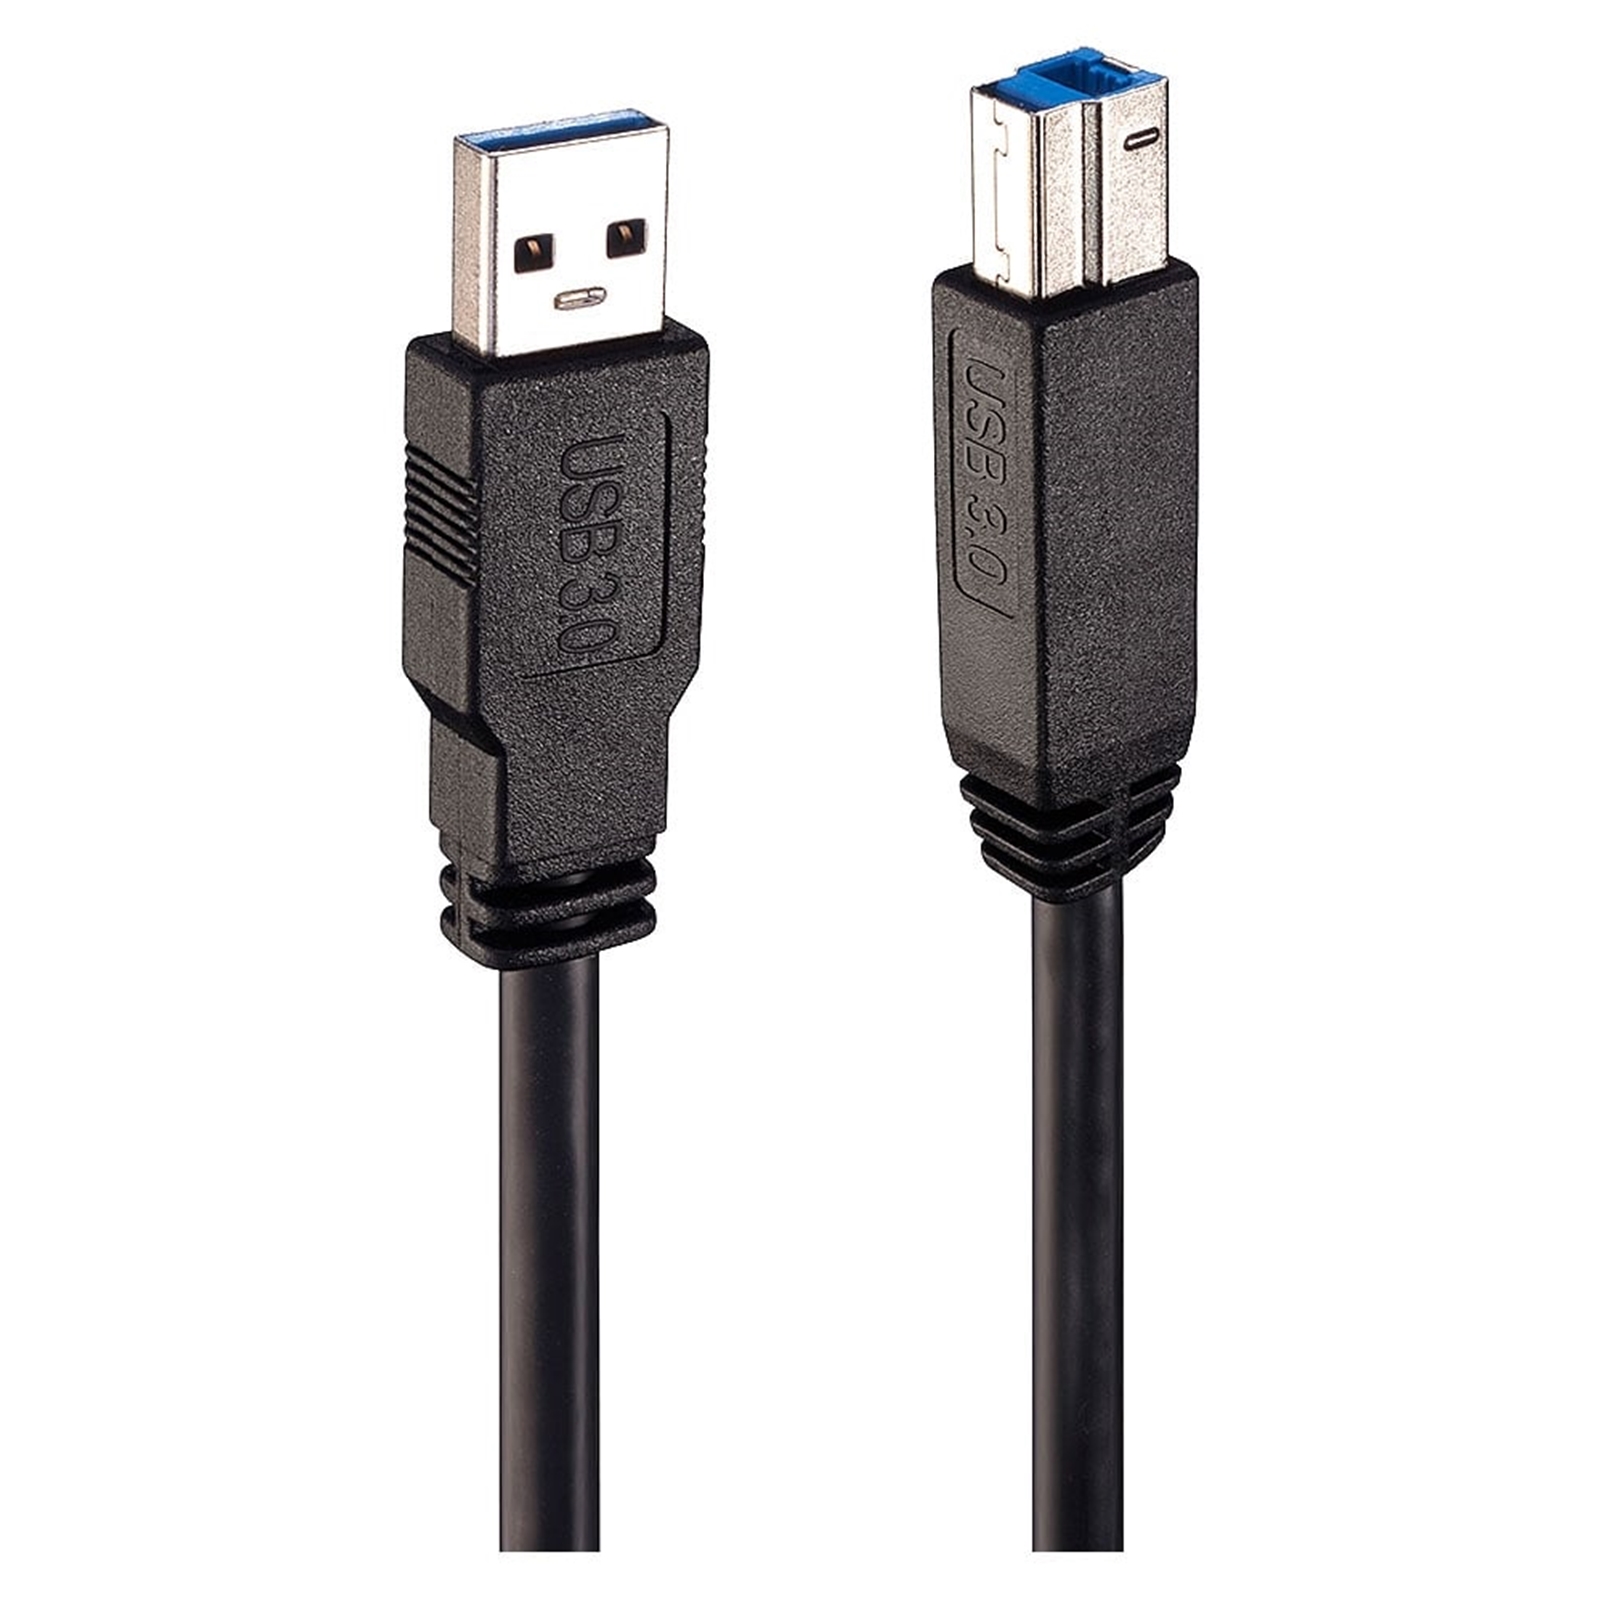 Lindy 43098 10m USB 3.0 Active Cable